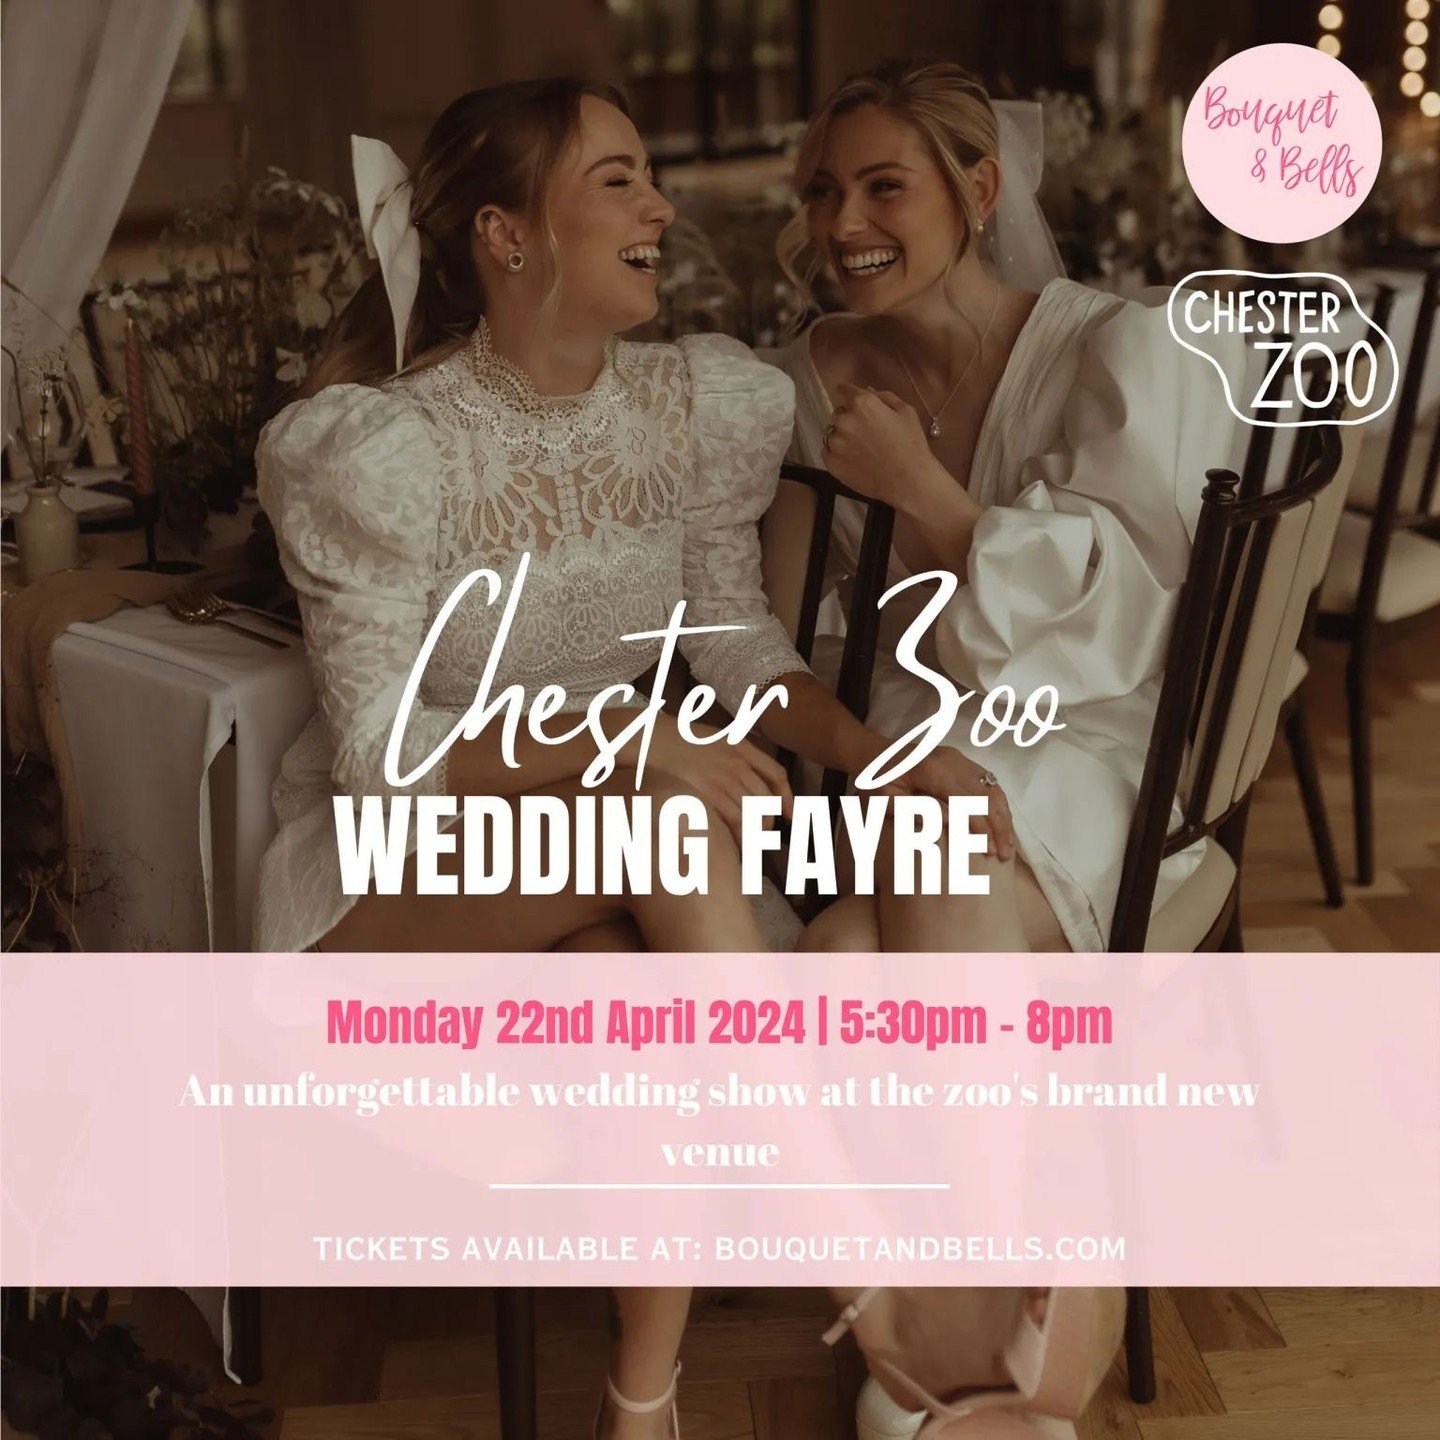 🎉 The countdown is on! Join me today at the Chester Zoo Wedding Fayre and let&rsquo;s turn your wedding dreams into reality. See you there! 🐘💍 

Leanne 🌻🌿 

&bull;
&bull;
&bull;
&bull;
&bull;

 #CheshireWeddingFlorist #CheshireBride #CheshireWed